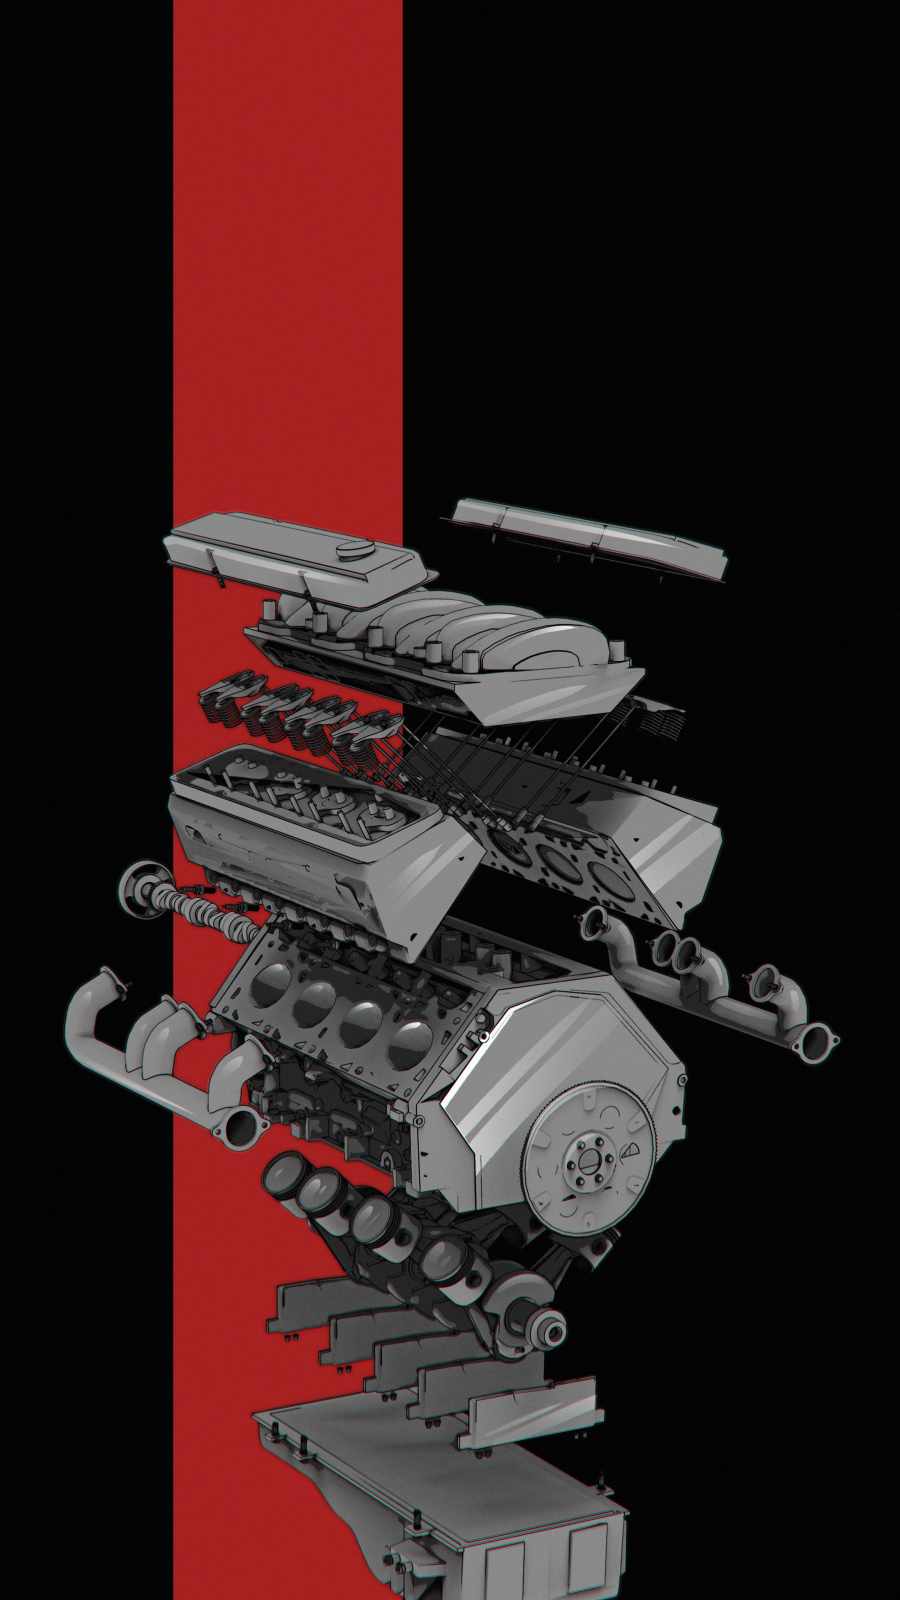 V8 Engine - IPhone Wallpapers : iPhone Wallpapers